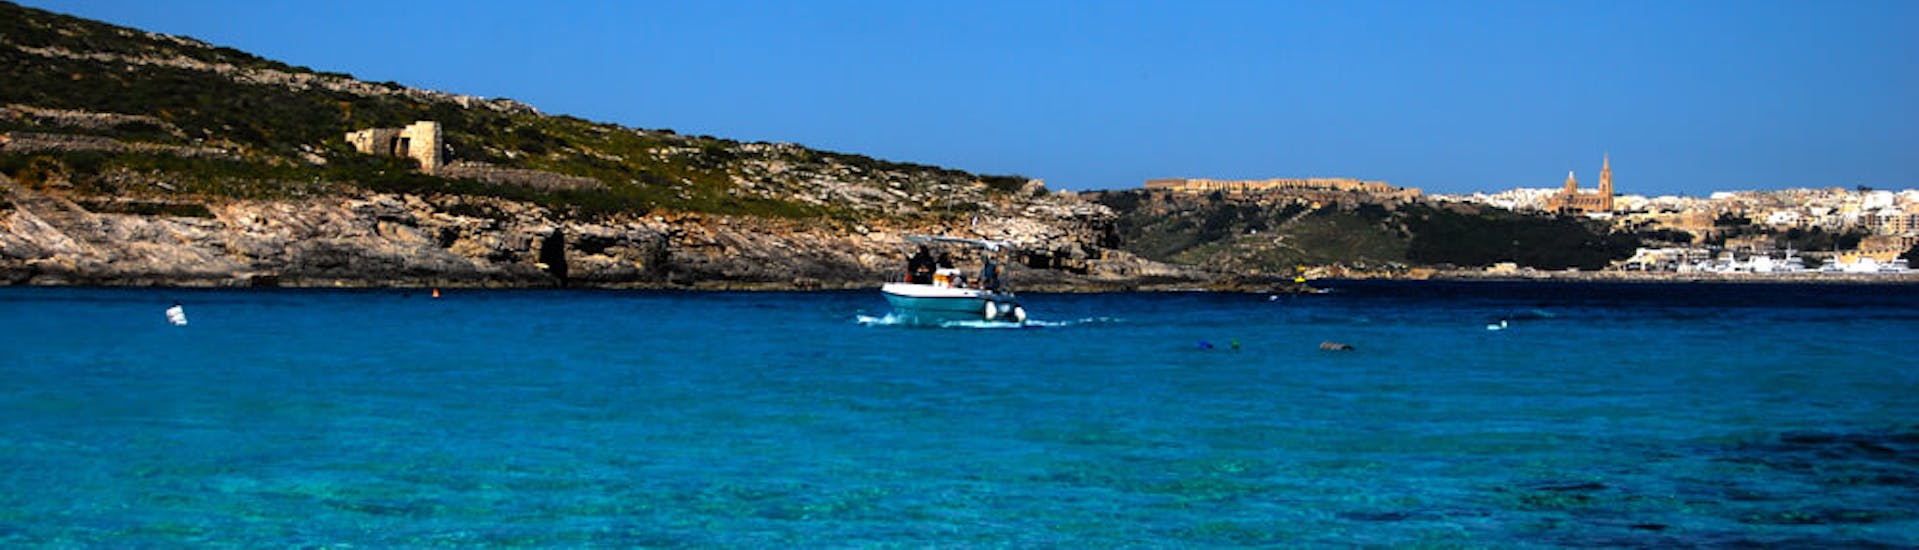 Boat Trip to Comino including Blue Lagoon from Gozo.